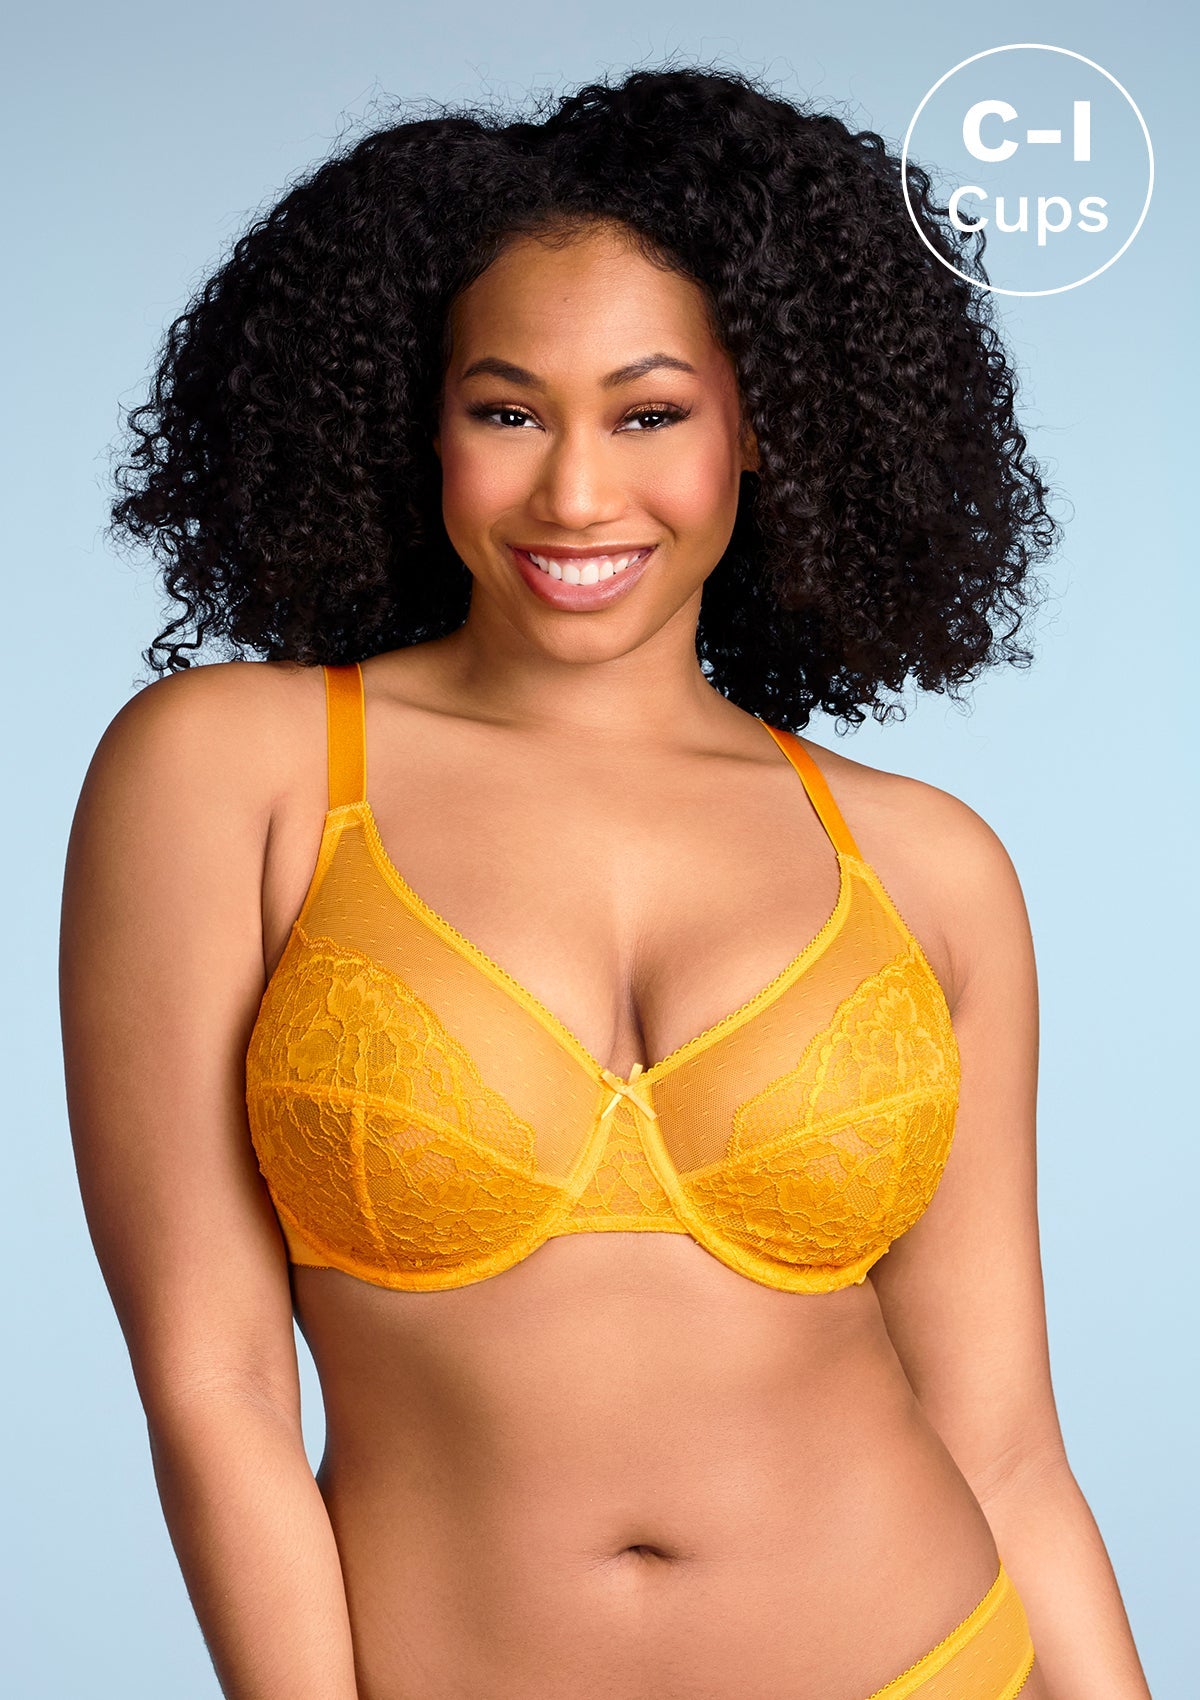 HSIA Enchante Bra And Panty Sets: Unpadded Bra With Back Support - Cadmium Yellow / 34 / C